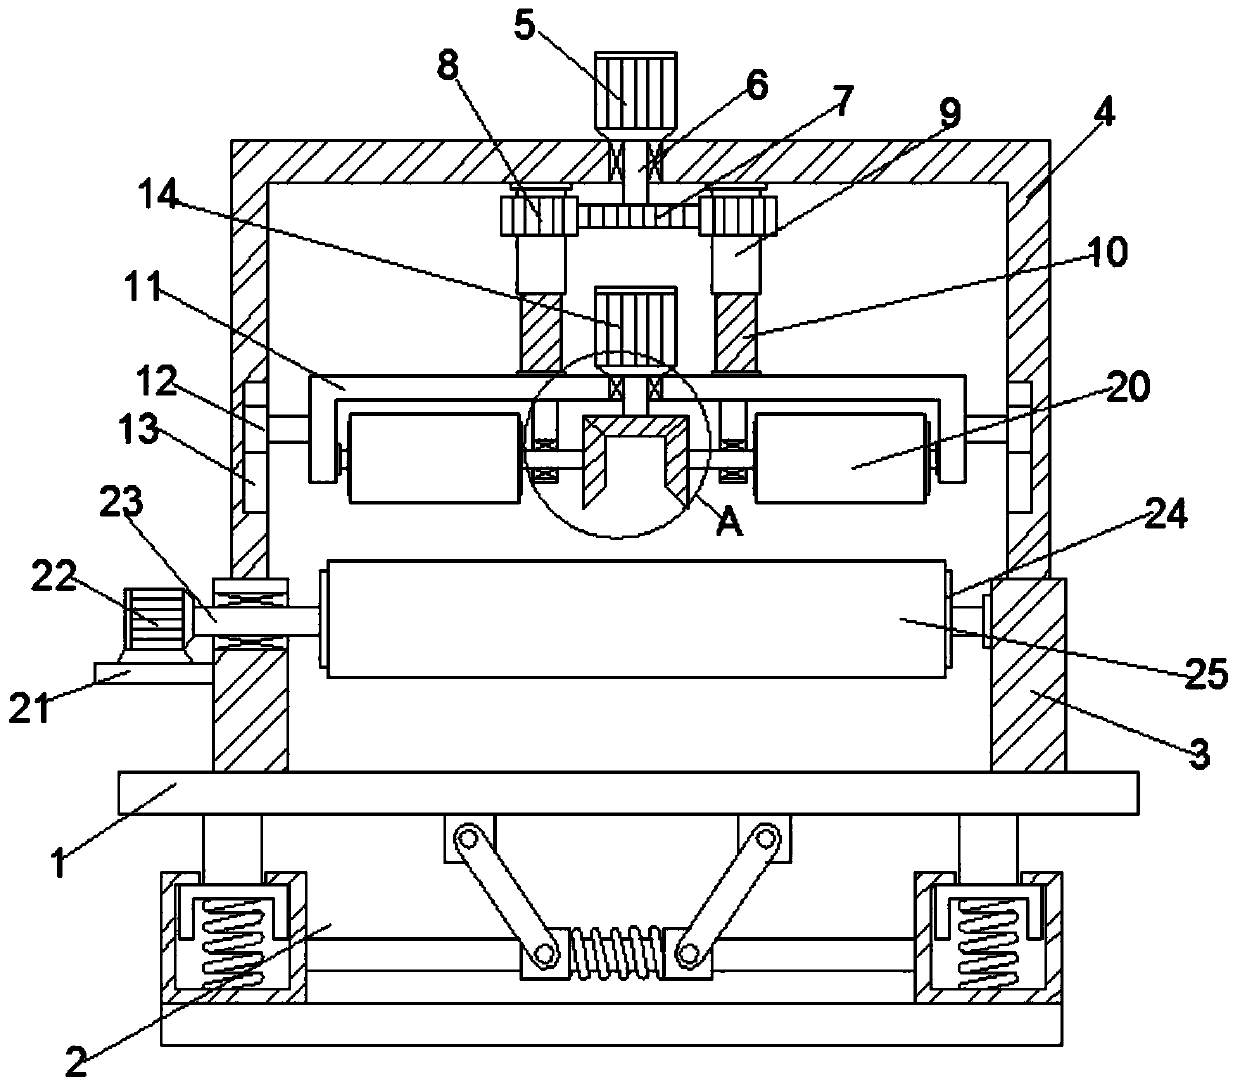 Dual-roller flattening machine with supporting structure